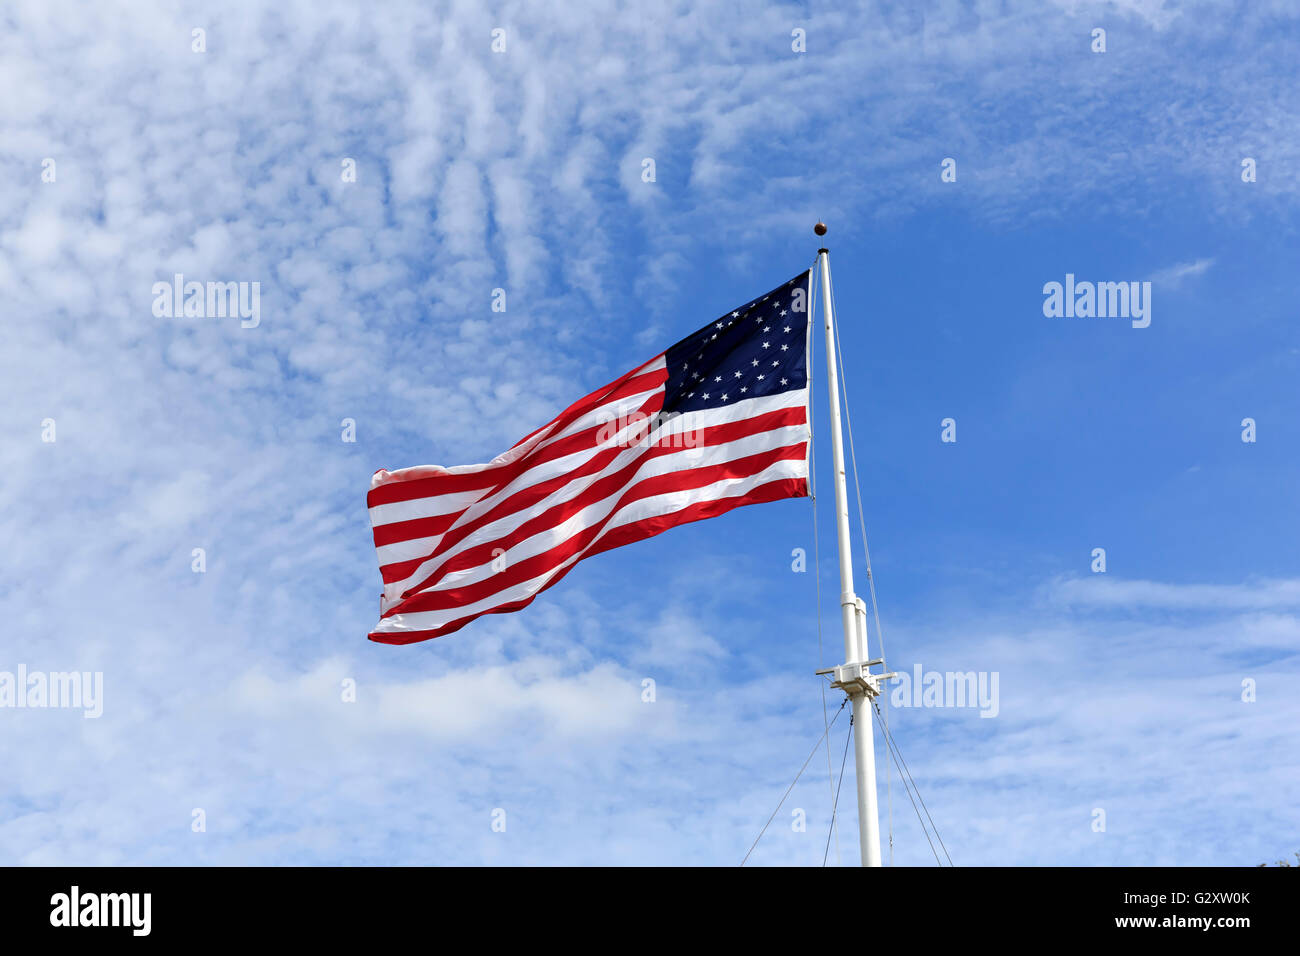 Historic version of the Stars and Stripes, with 13 stripes and 35 stars depicted in two circles. Stock Photo